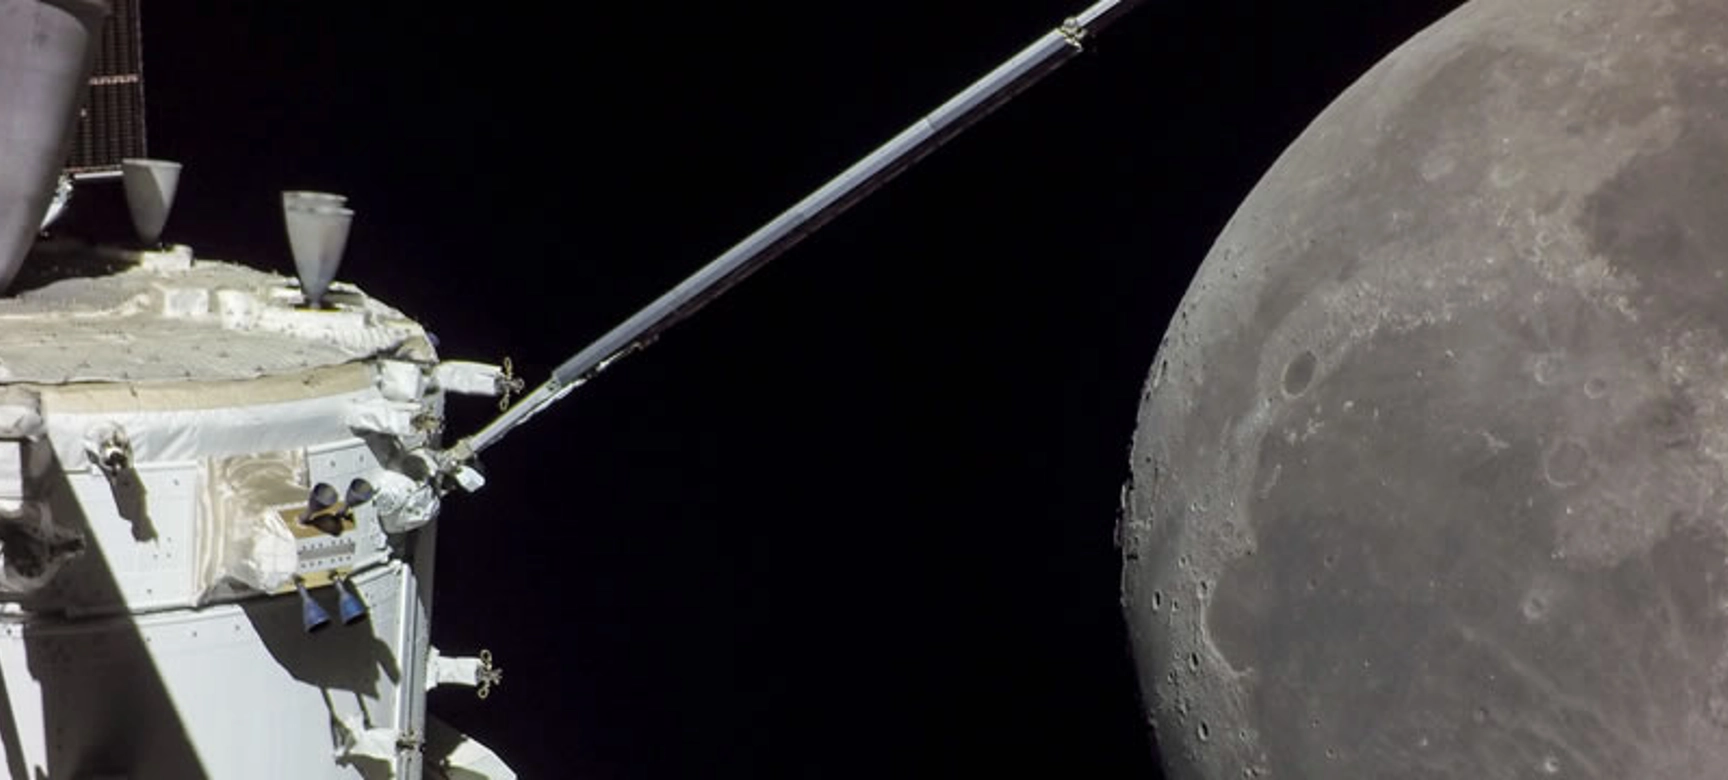 Orion Spacecraft to the Moon (1)